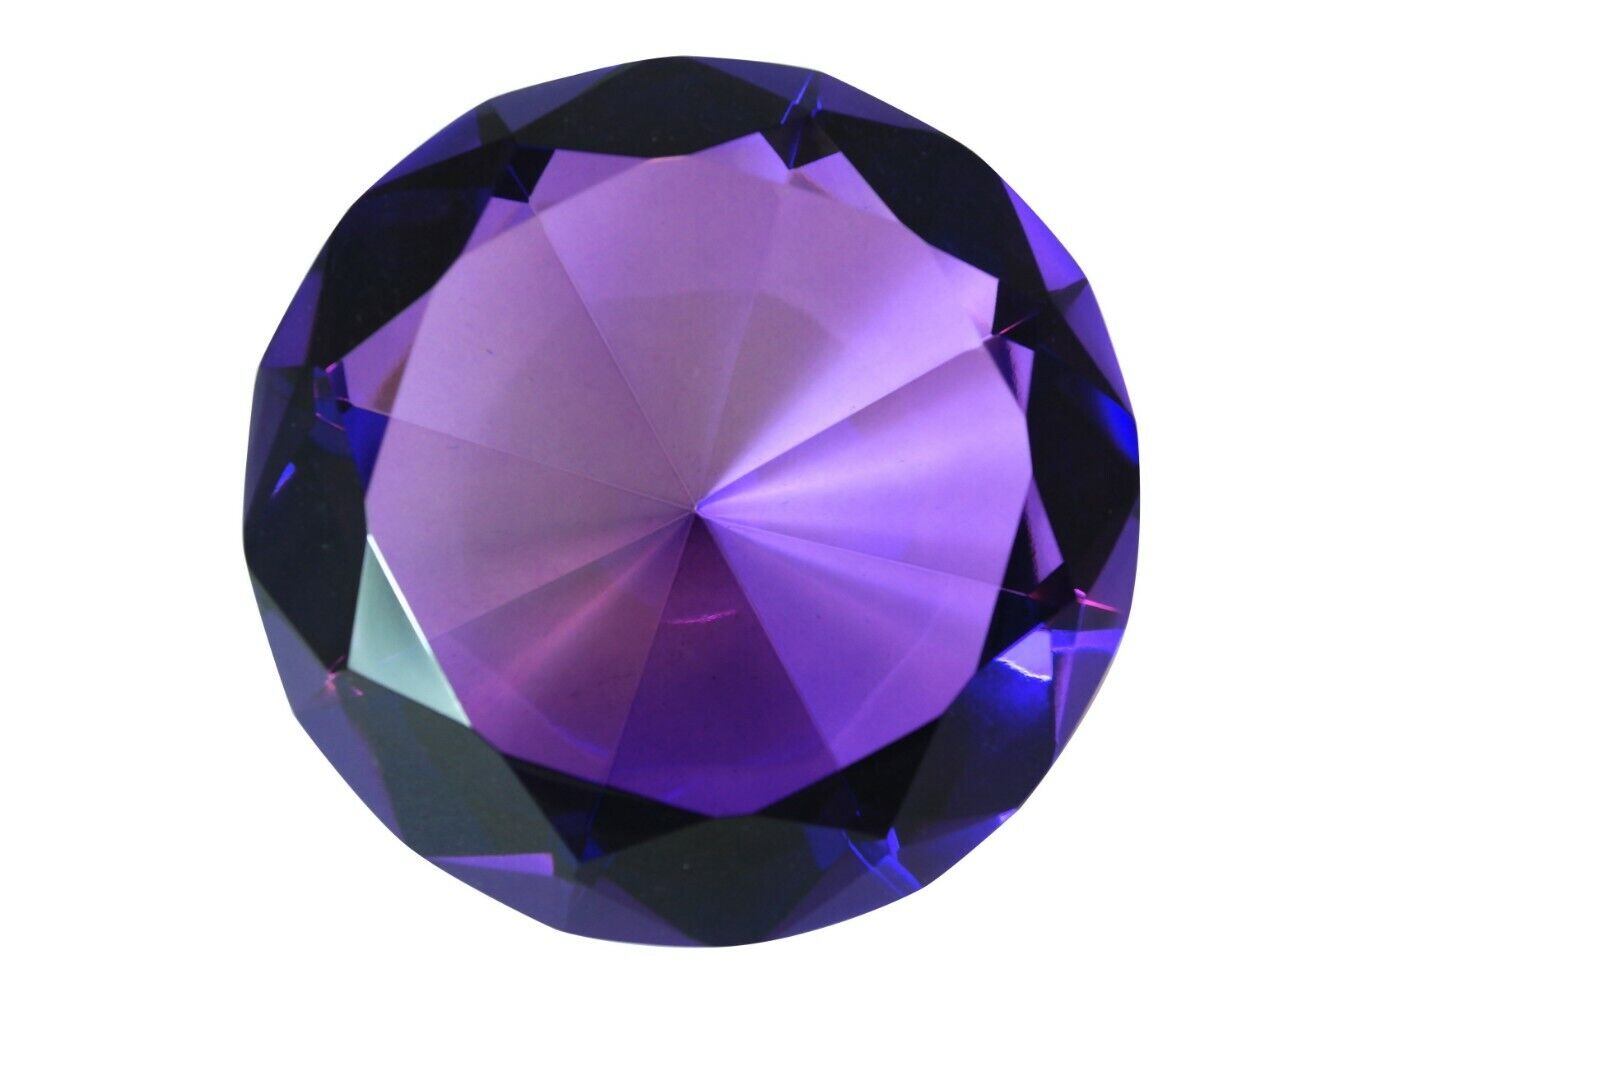 100 mm Amethyst Diamond Shaped Crystal Jewel Paperweight by Tripact